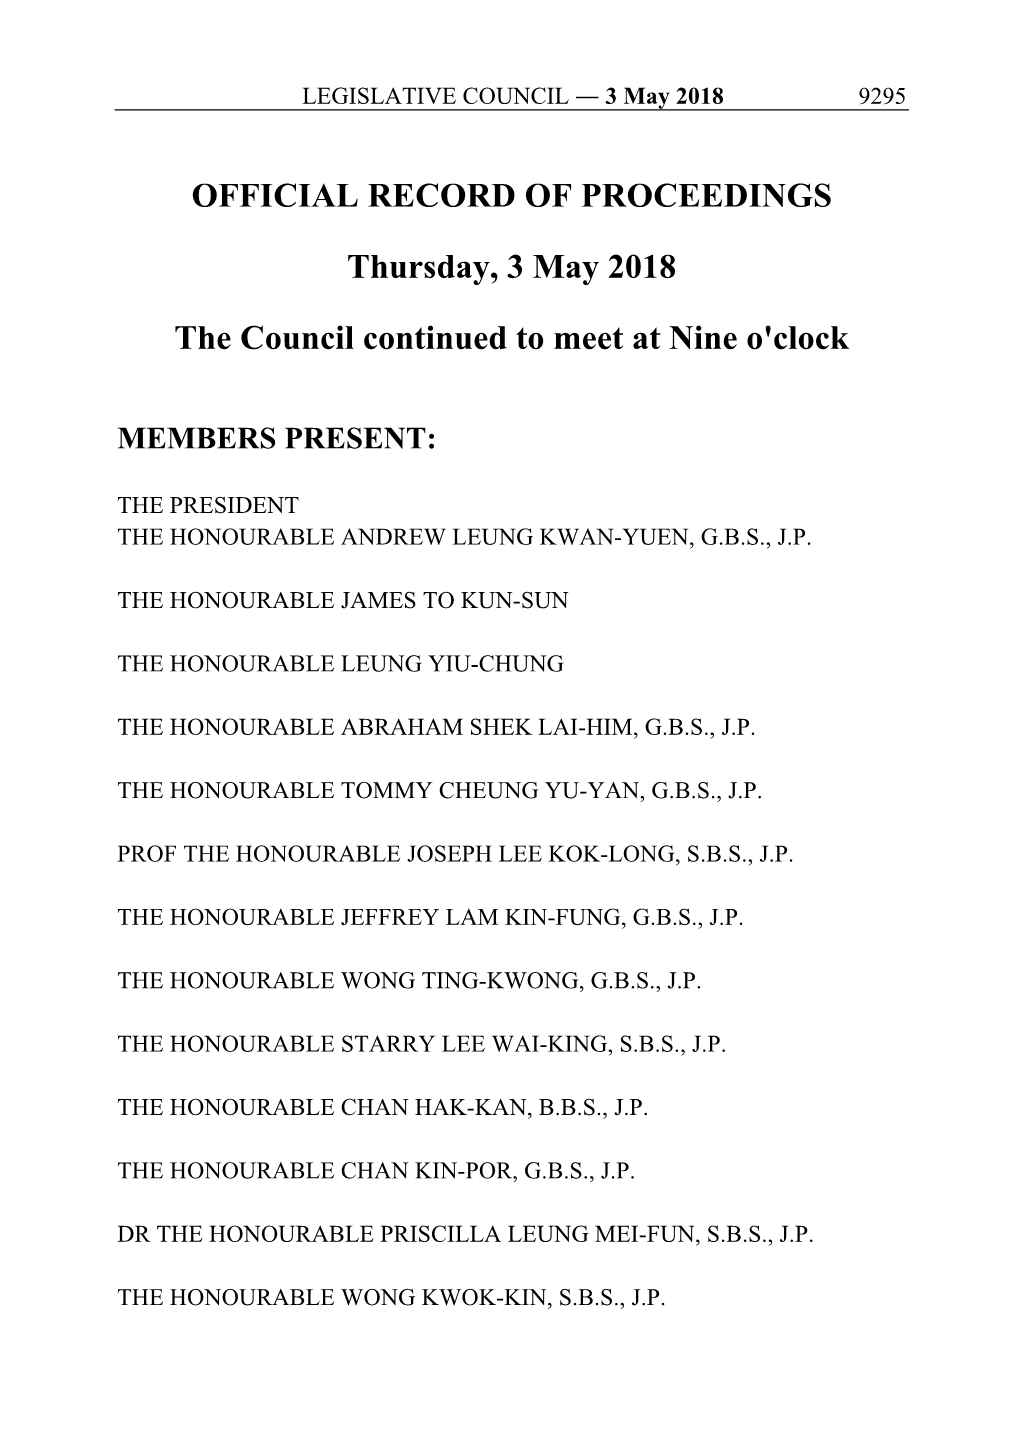 OFFICIAL RECORD of PROCEEDINGS Thursday, 3 May